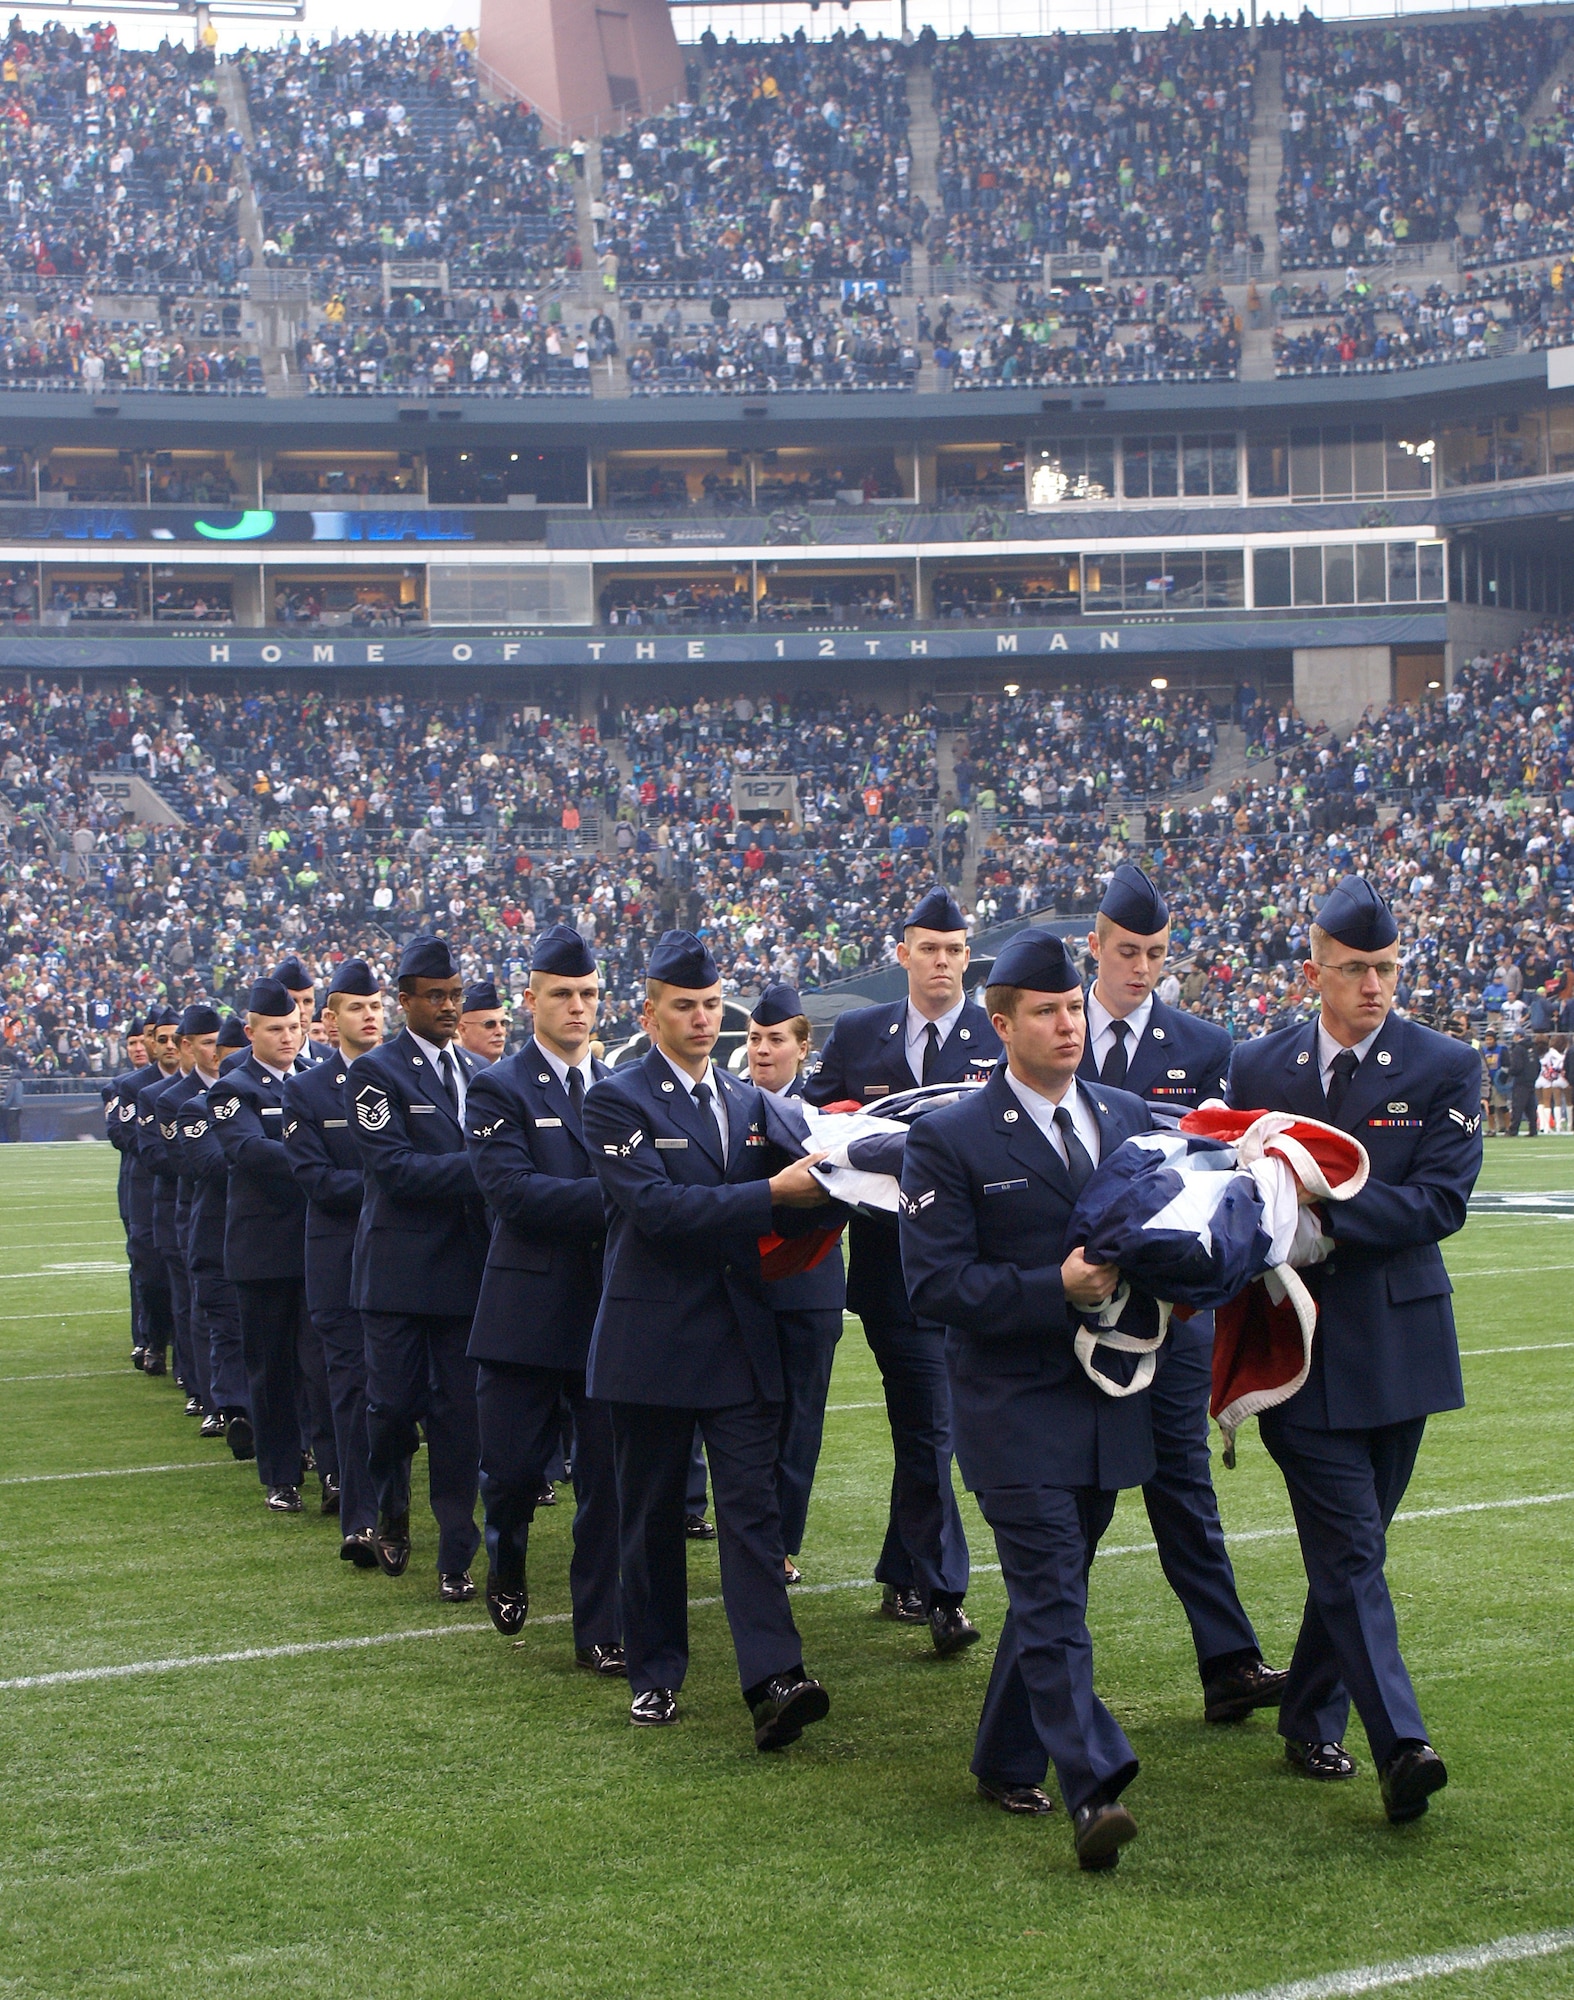 SEATTLE - Airmen from McChord Air Force Base, Wash.,, including 14 people from the 446th Airlift Wing, walk a large American flag onto the field at the Nov. 8 Seattle Seahwaks game against the Detroit Lions.  The Seahawks paid tribute to the military services during pre-game activities. Servicemembers from each military branch were honored for their service to the country.  (U.S. Air Force photo/Staff Sgt. Eric Burks)                  